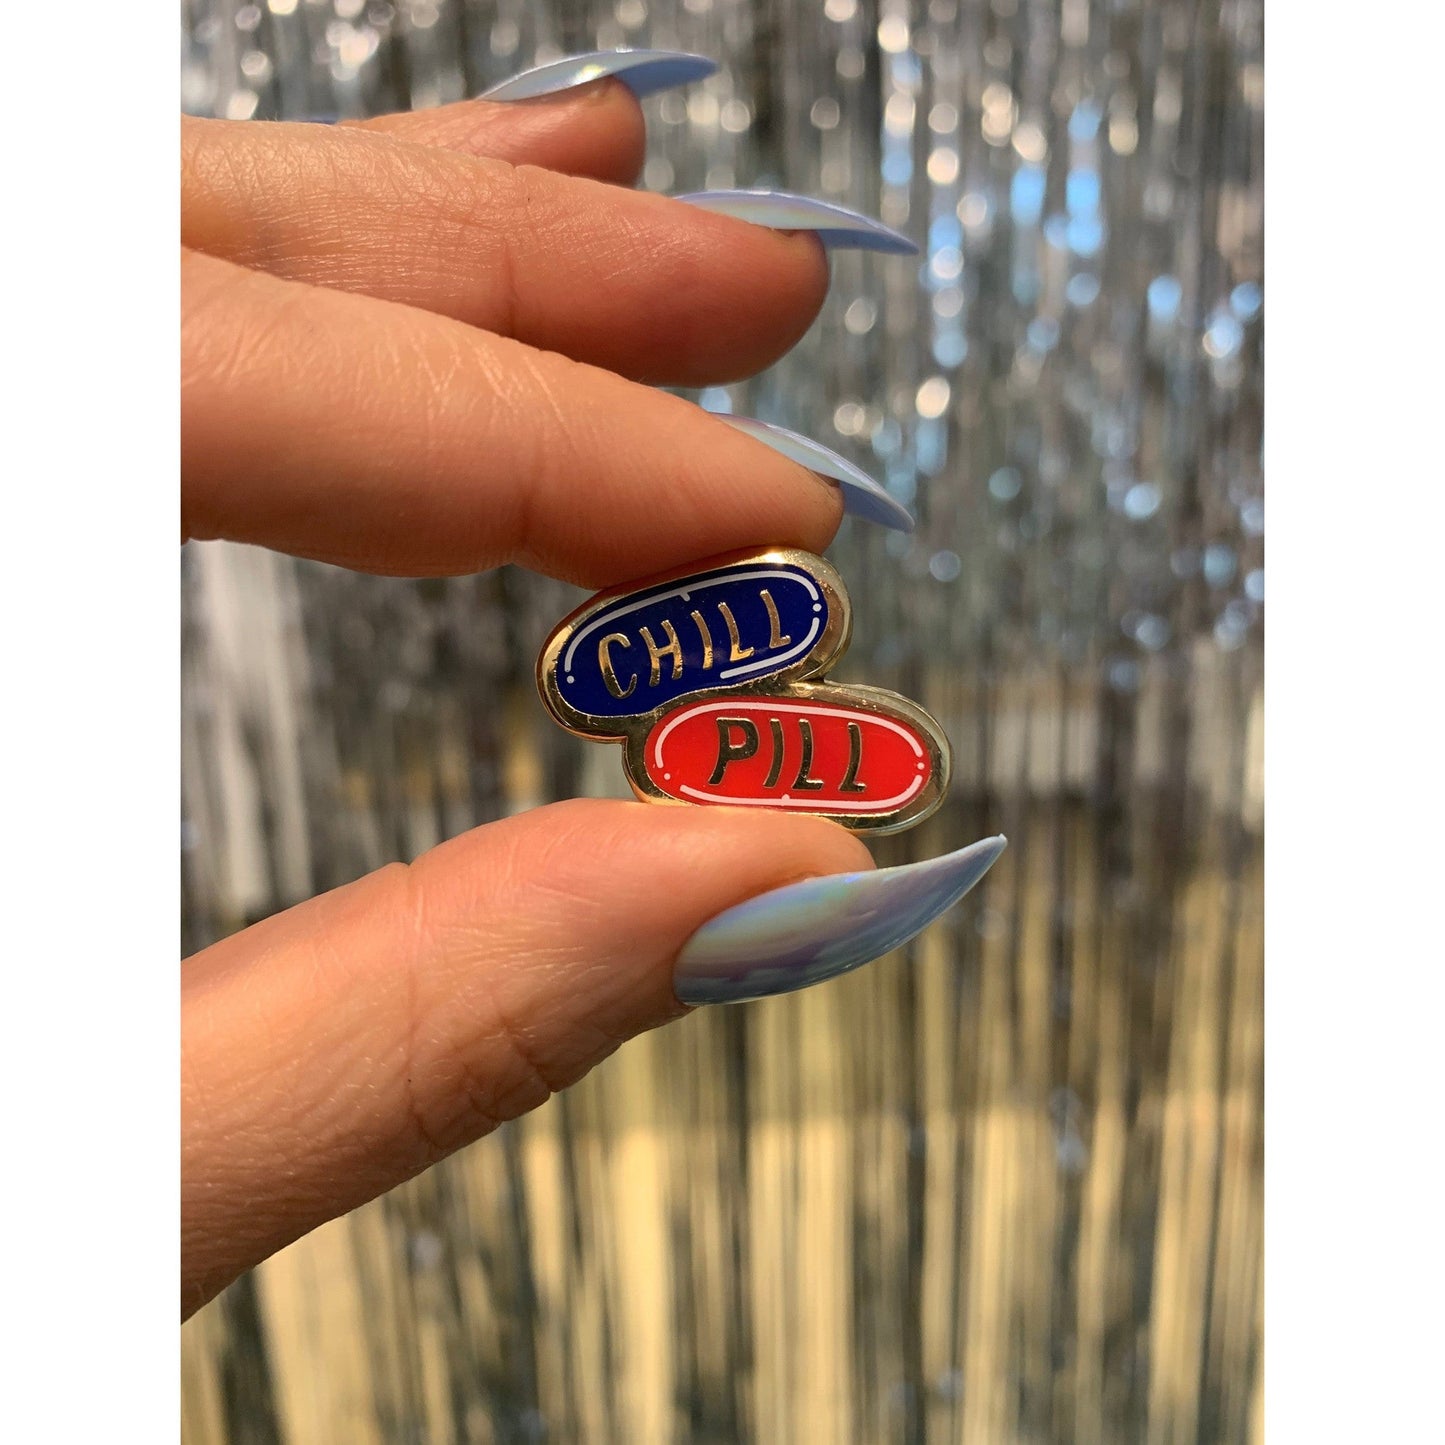 Take A Chill Pill Enamel Pin on Gift Card